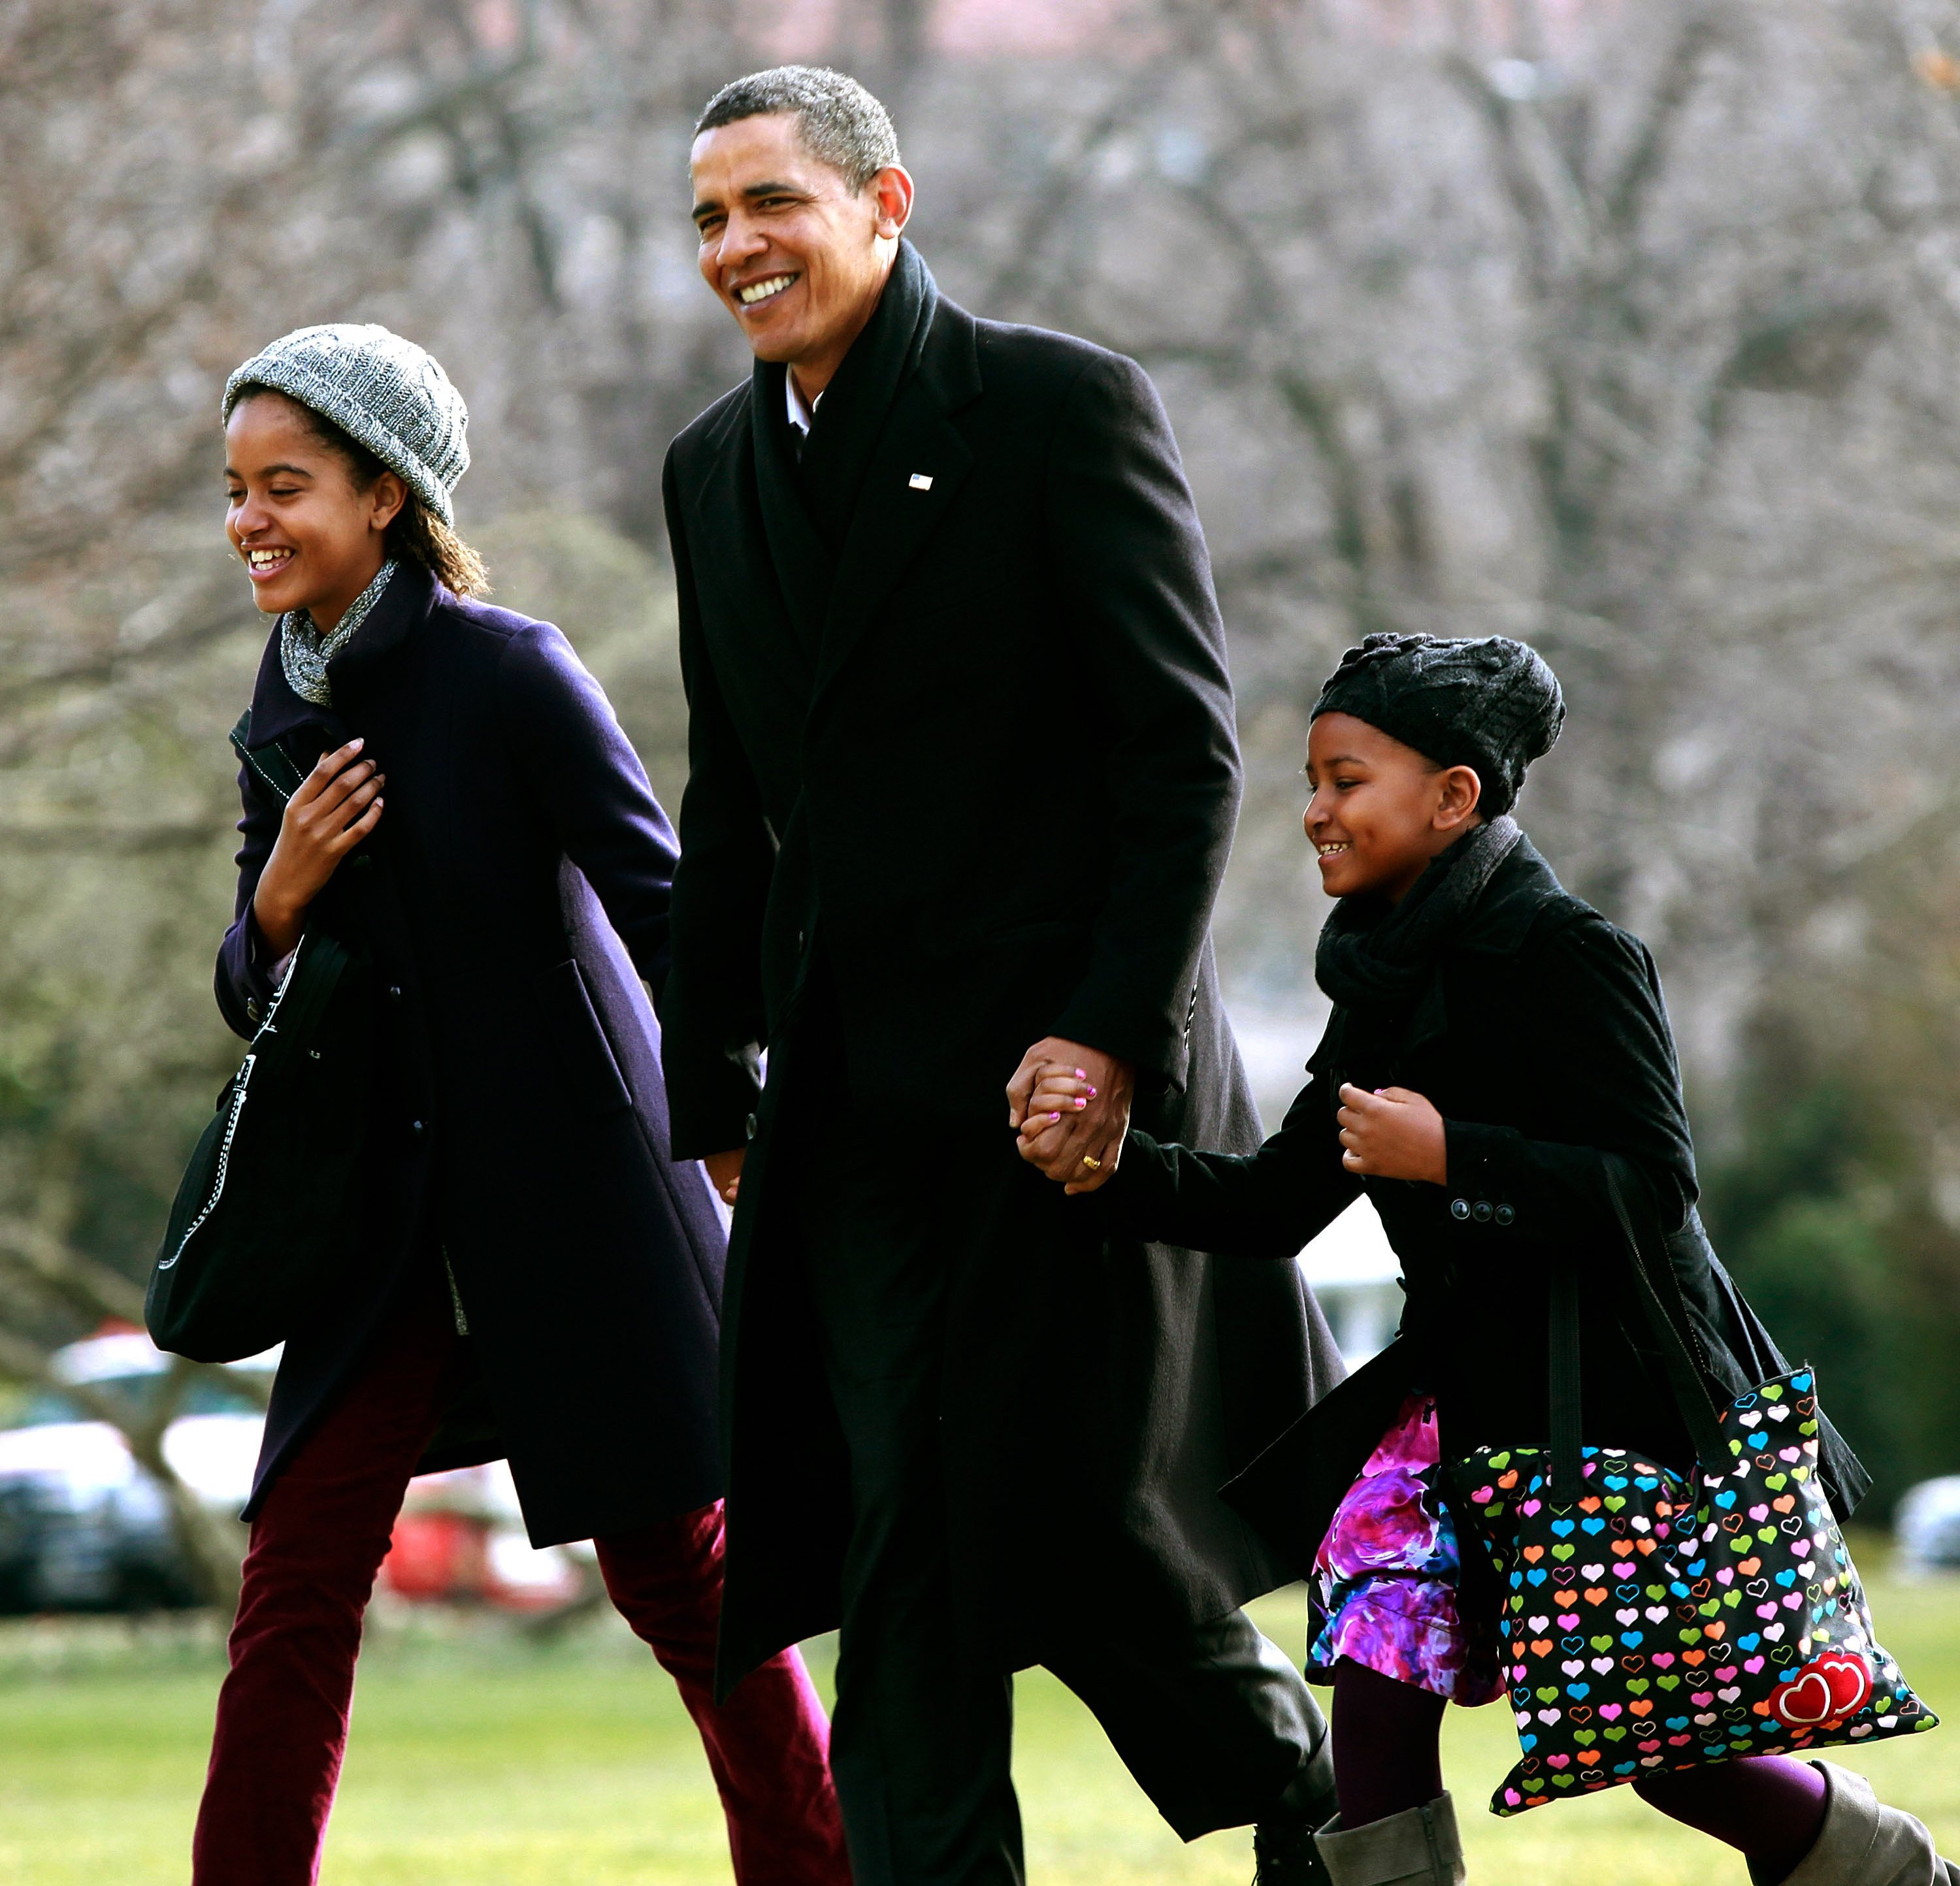 Then-President Barack Obama with his daughters Malia and Sasha on the Souh Lawn of the White House on January 4 2010 in Washington D,C. | Source: Getty Images